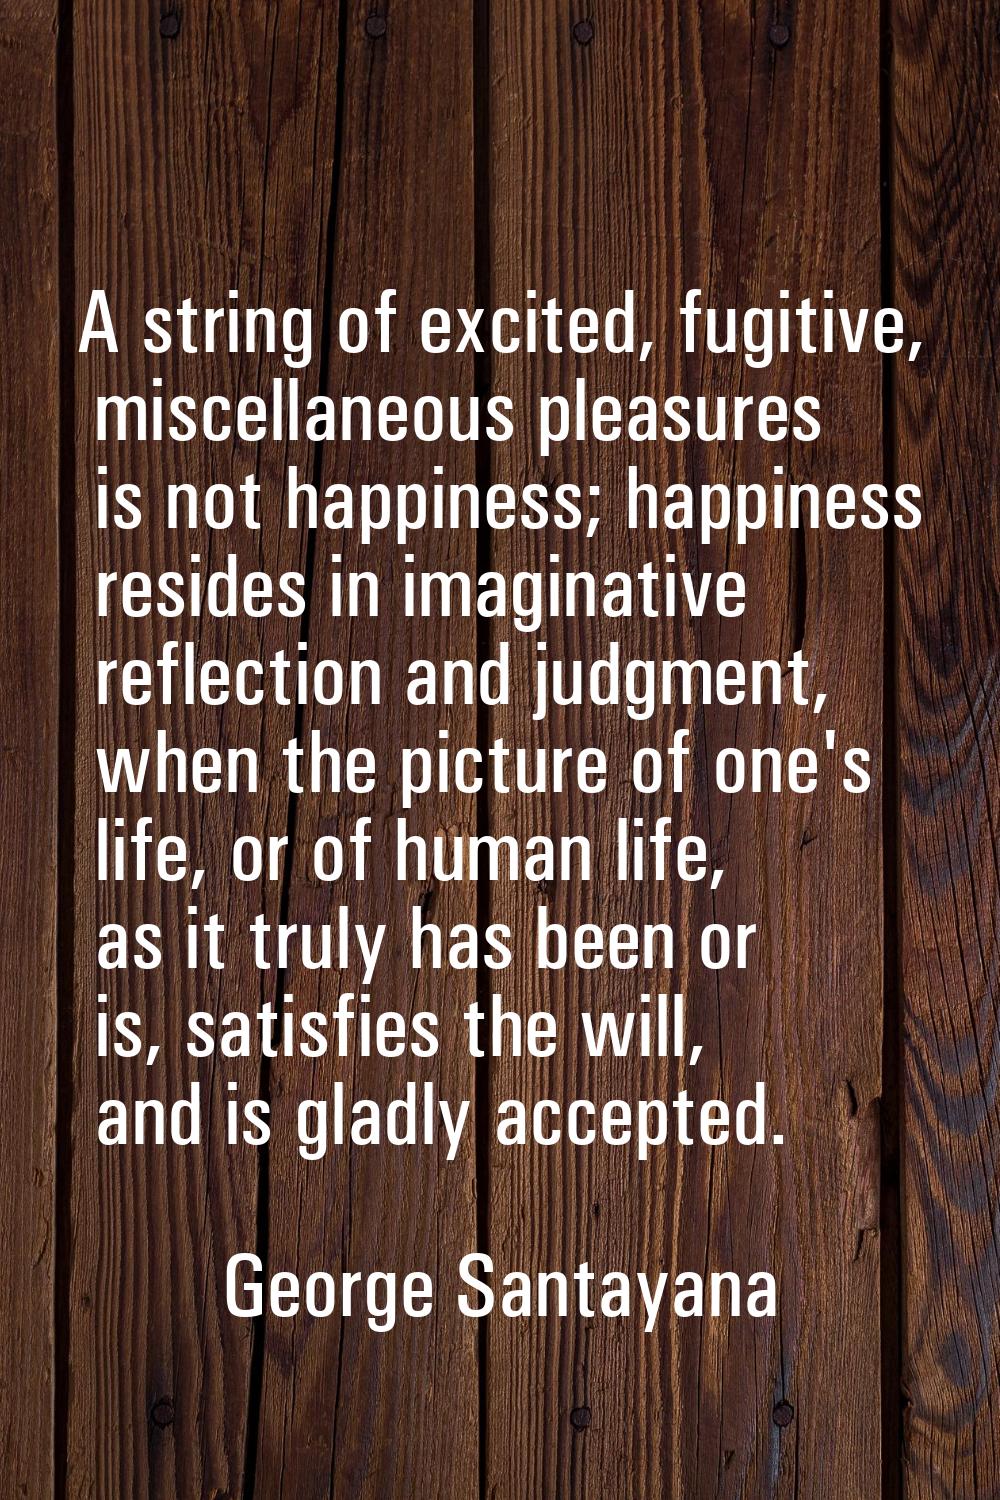 A string of excited, fugitive, miscellaneous pleasures is not happiness; happiness resides in imagi